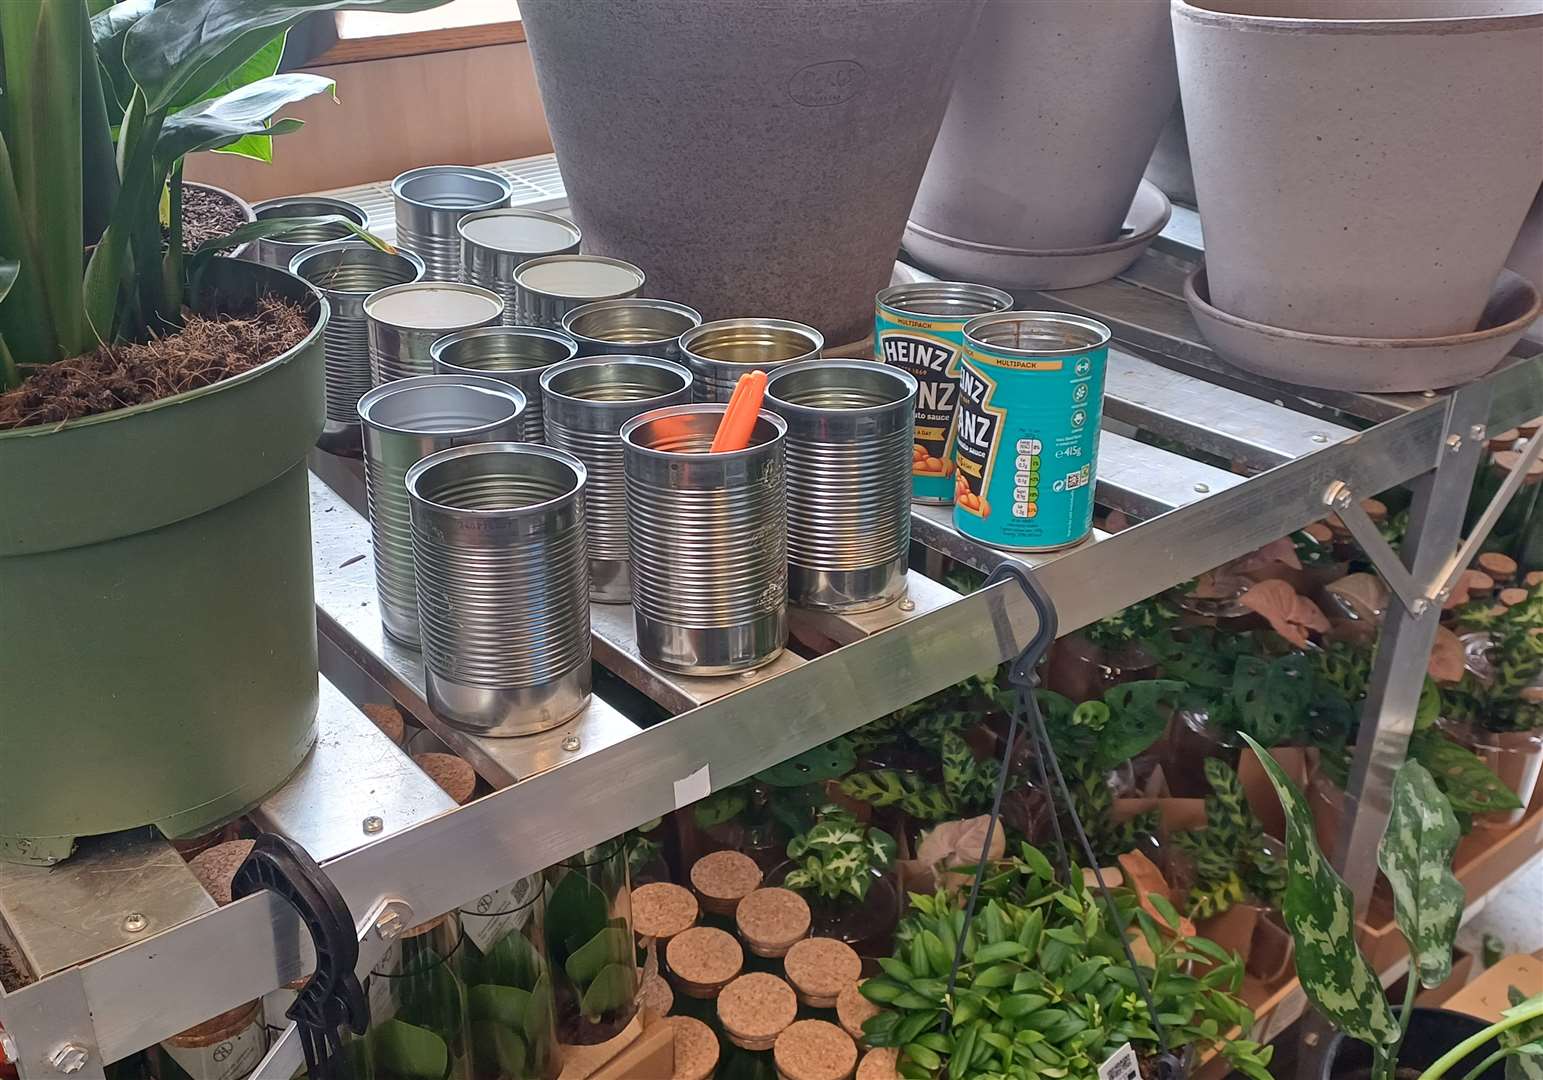 Tins, which usually contain canned food in prisons, are being incorporated into the exhibit